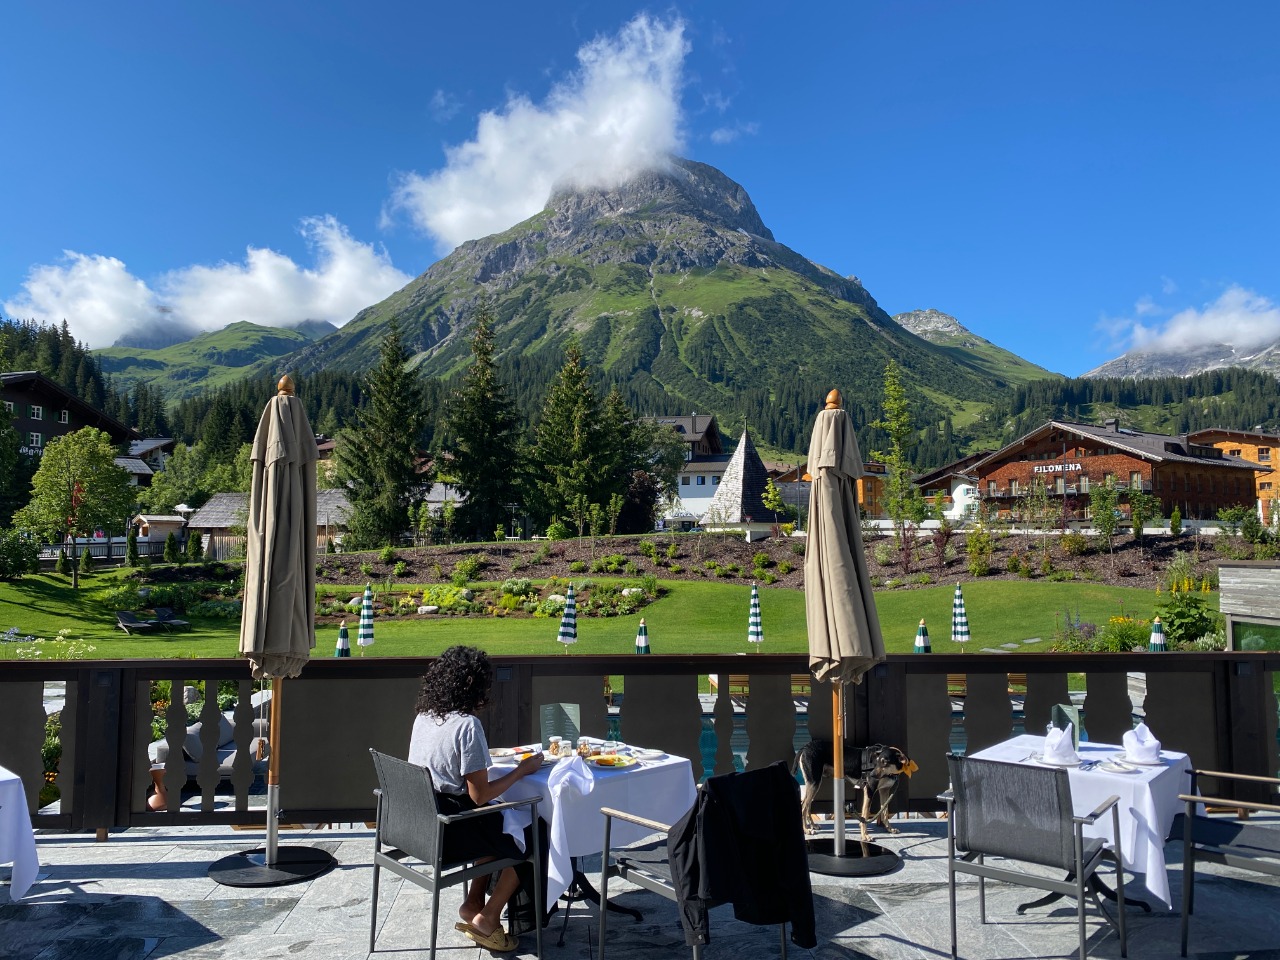 Hotel Arlberg But, first things first: a delicious breakfast with this view